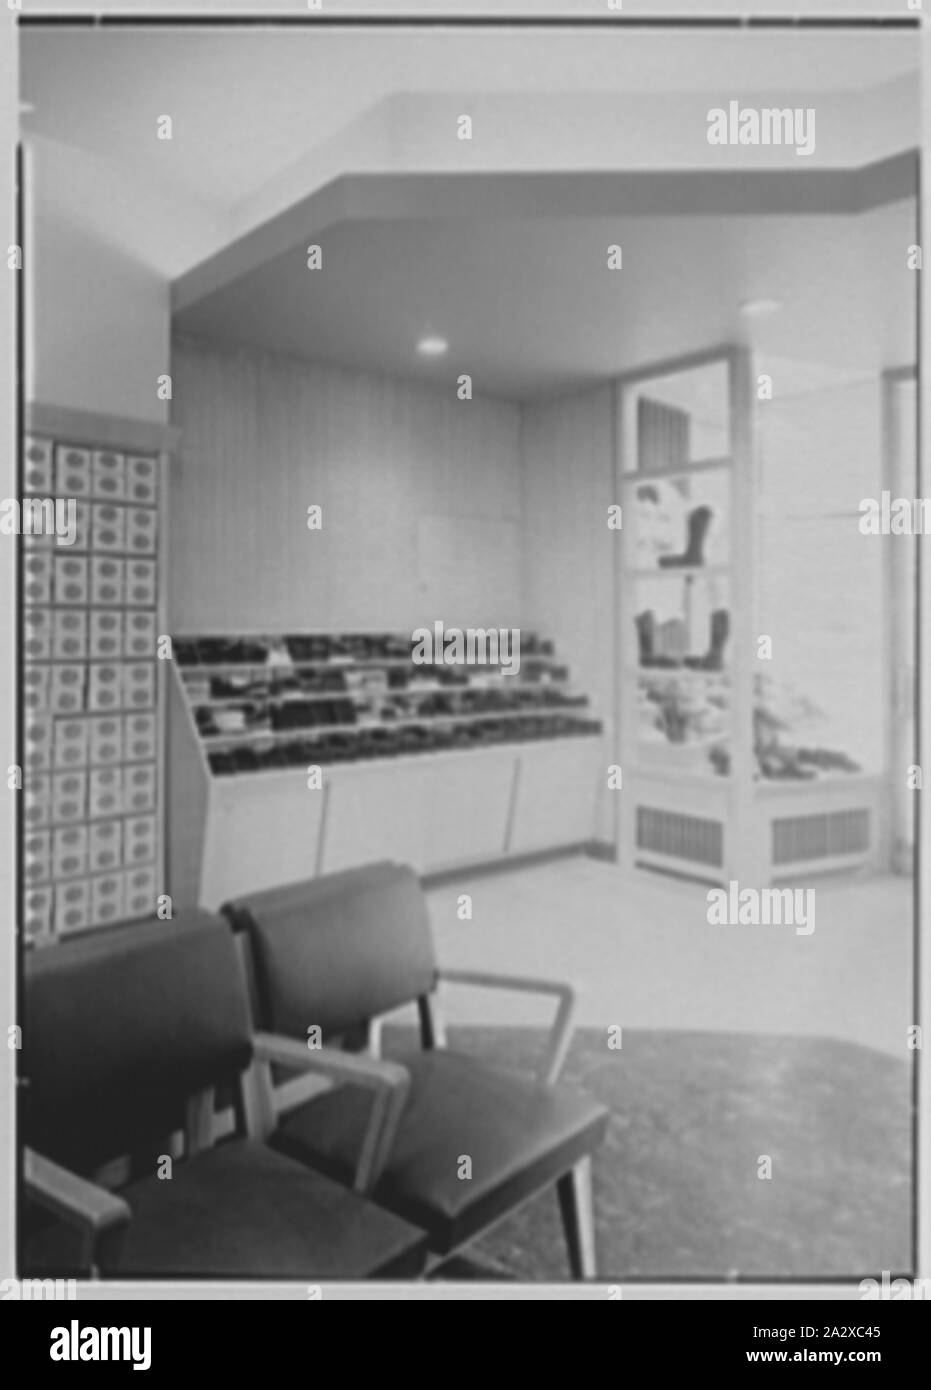 Rival Shoe Company, business at 151 W. 125th St., New York City. Stock Photo